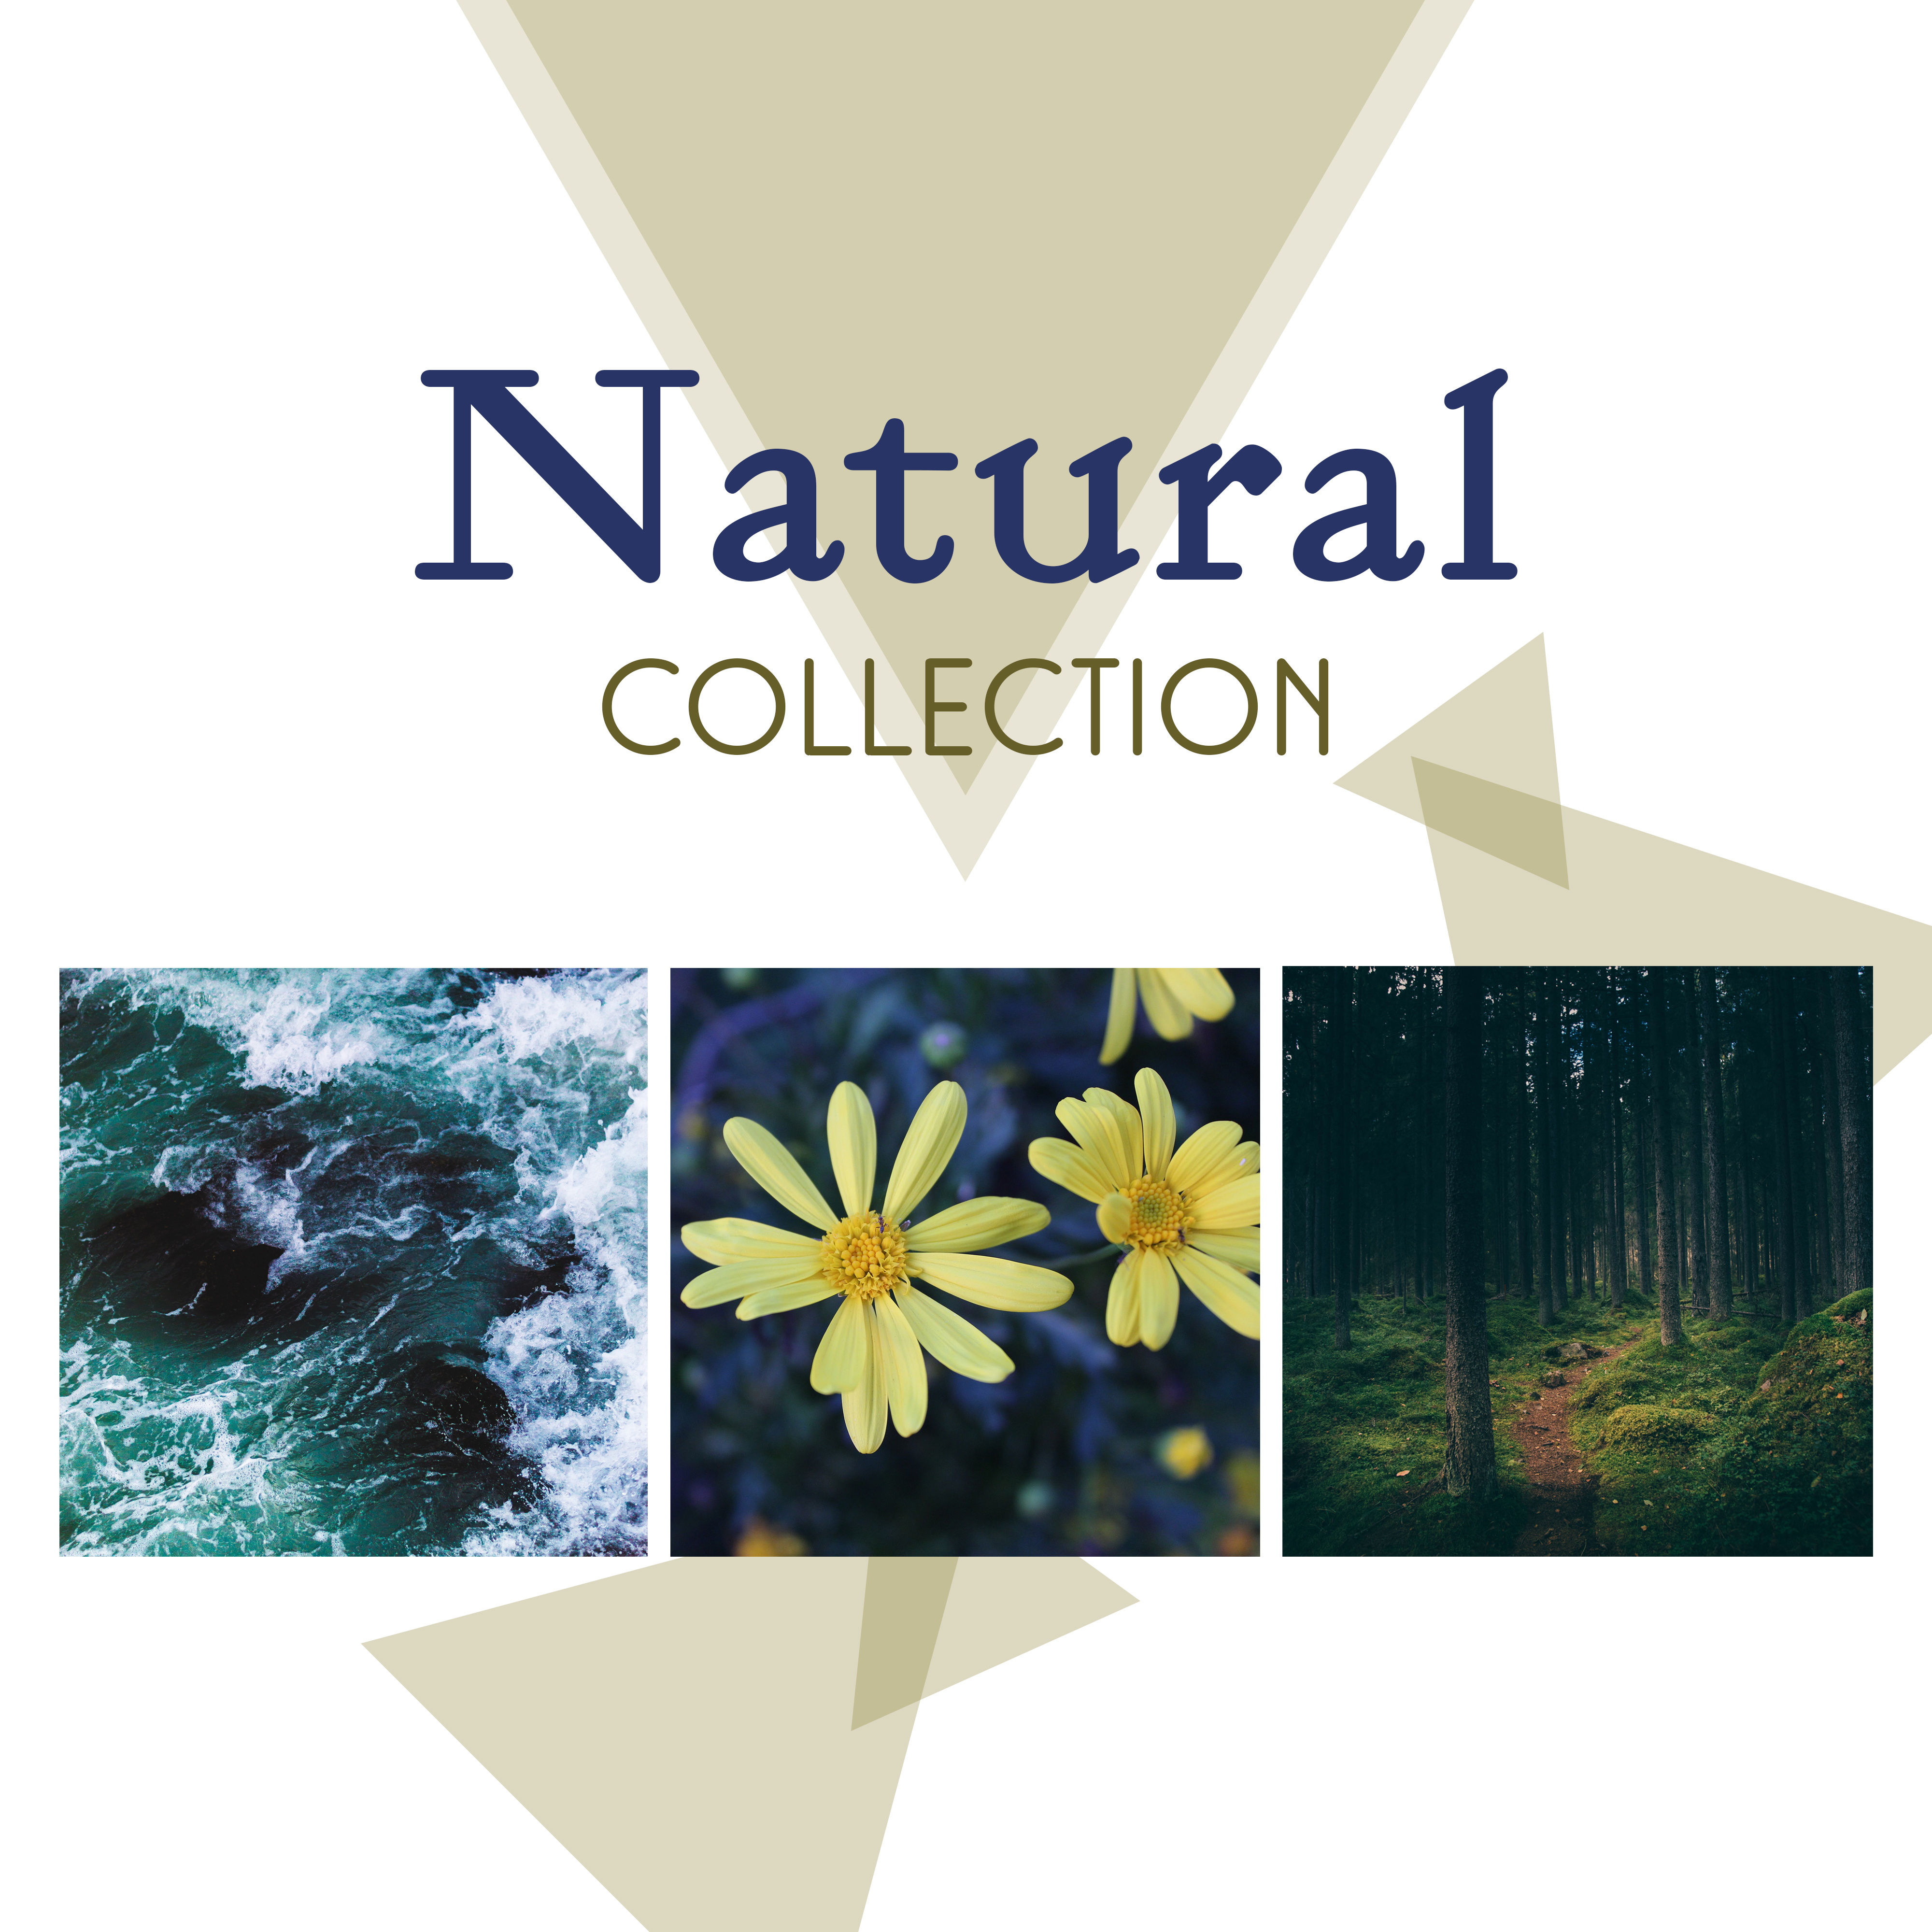 Natural Collection – Ultimate New Age Music, Peaceful Sounds of Nature, Green Garden, Zen, Rest, Relaxation